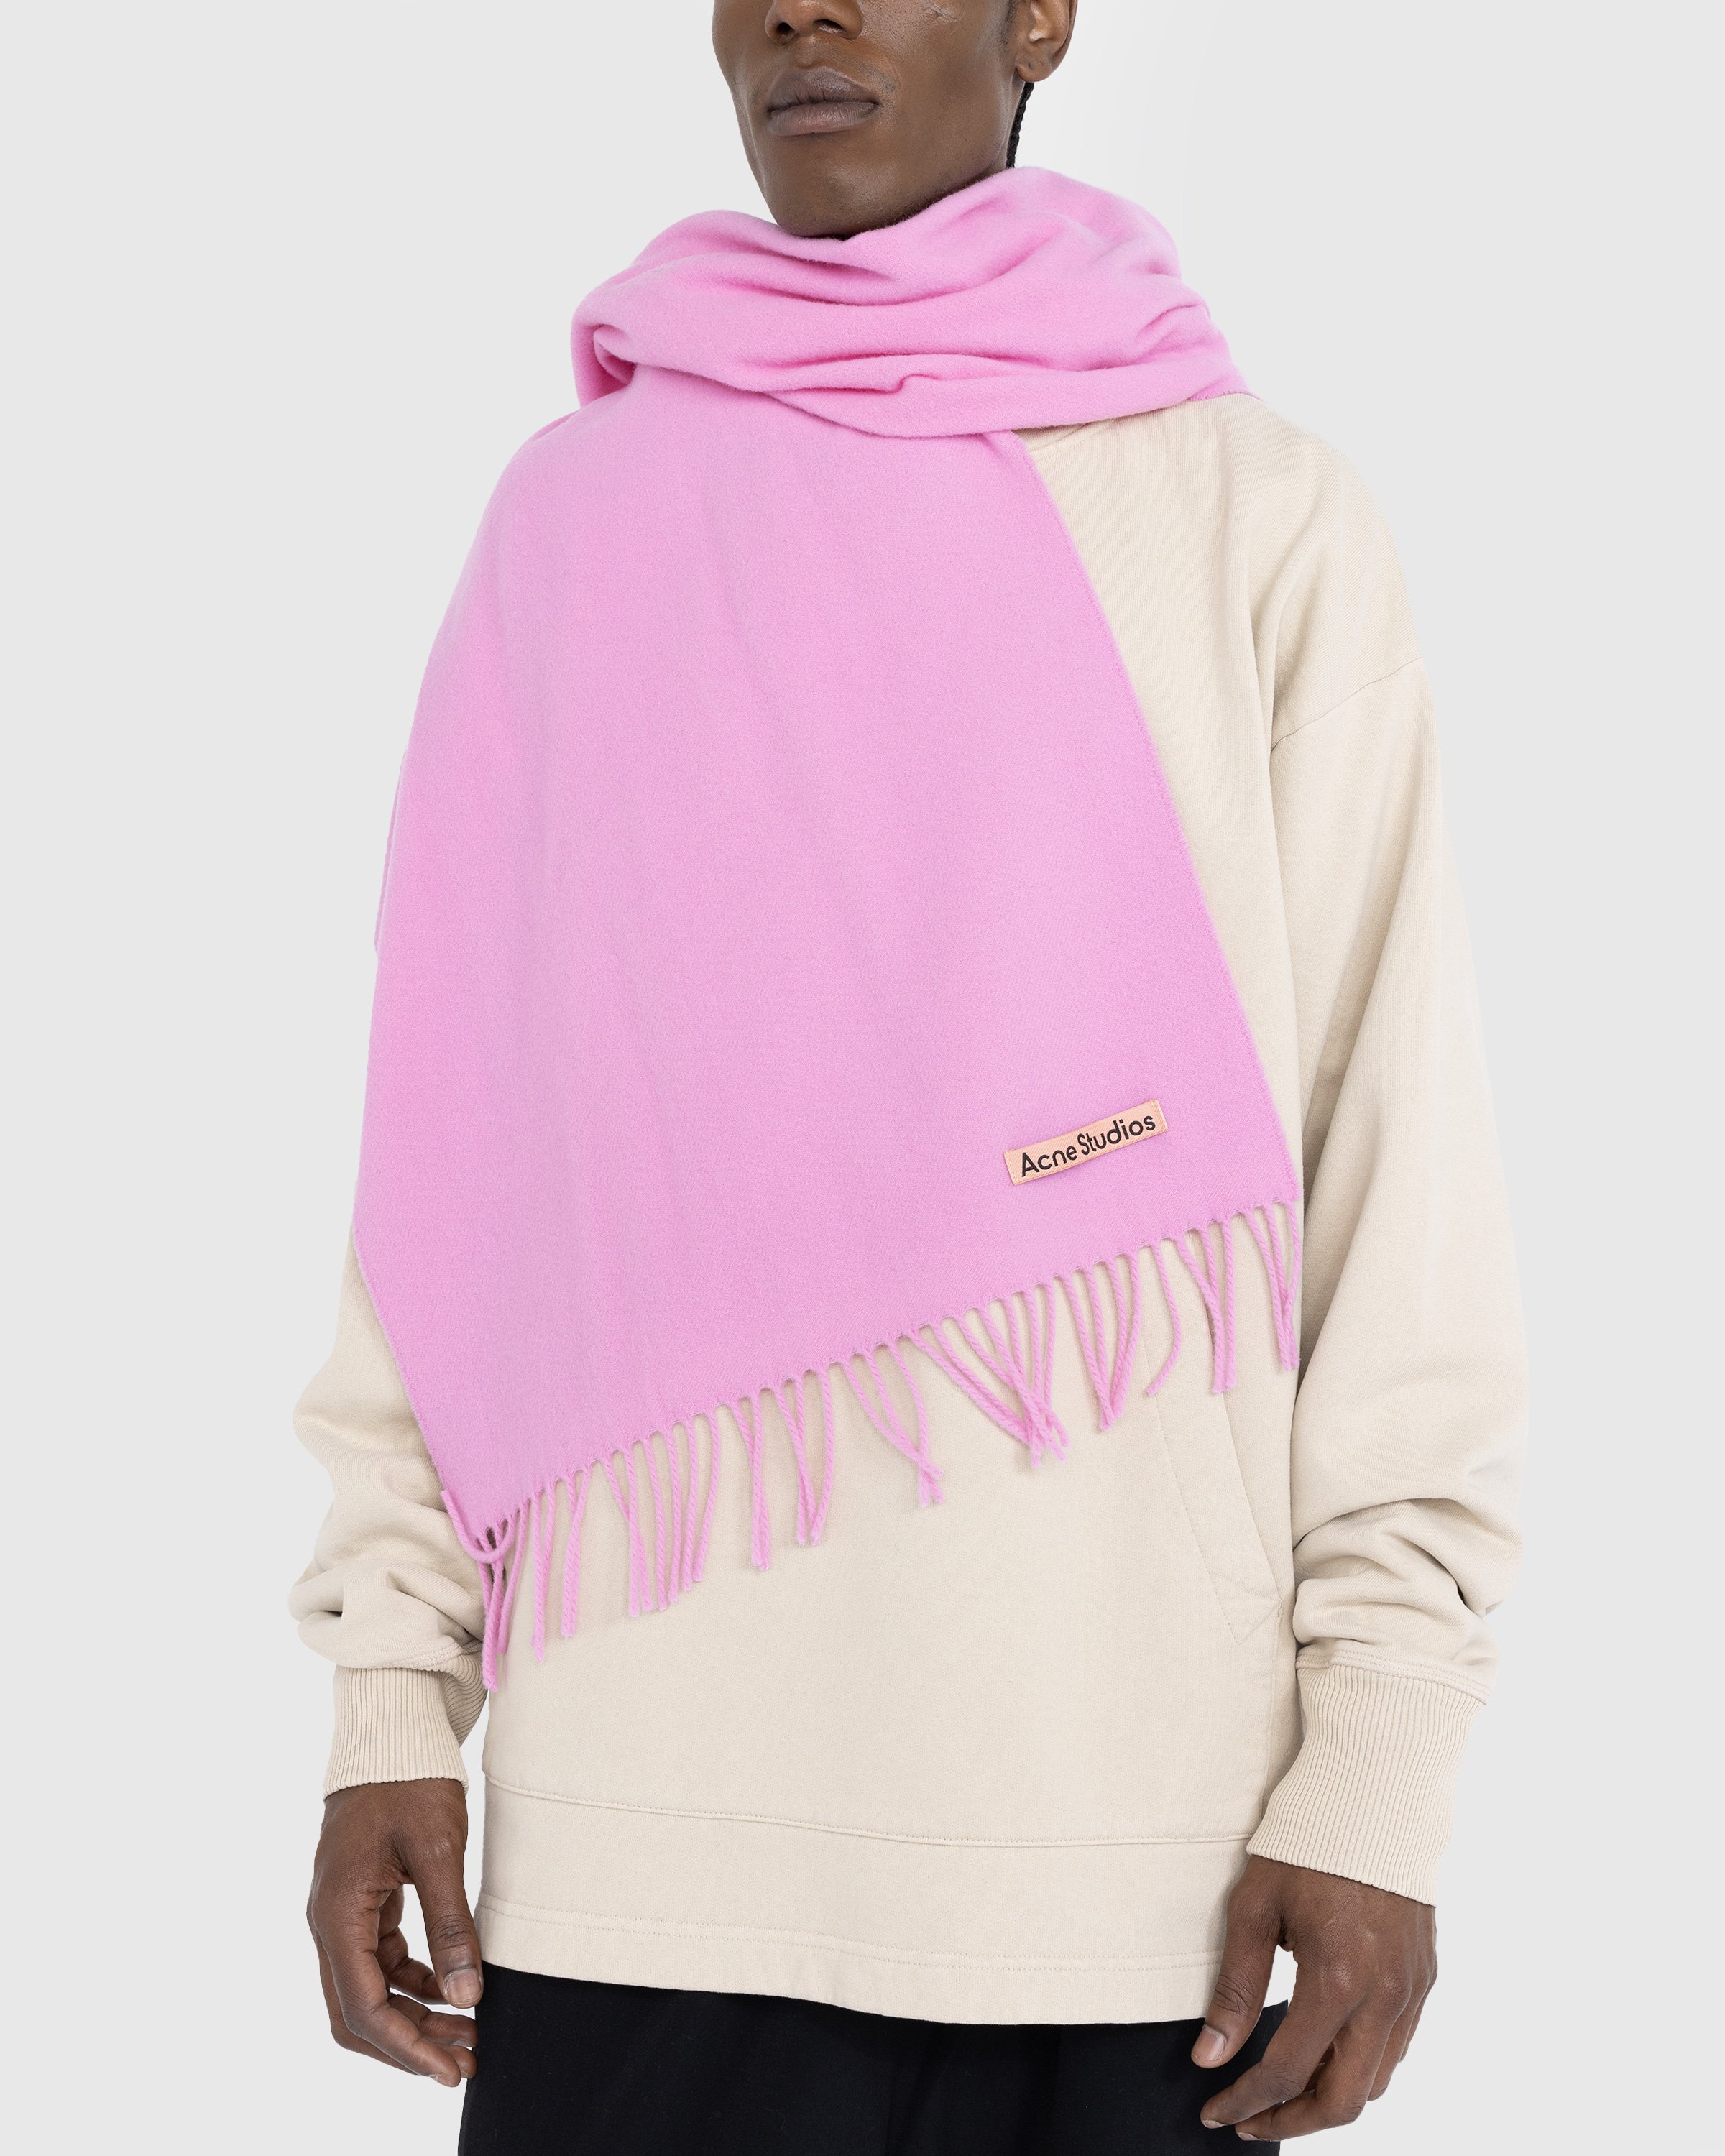 Acne Studios - Fringe Wool Scarf Bubble Pink - Accessories - Pink - Image 4